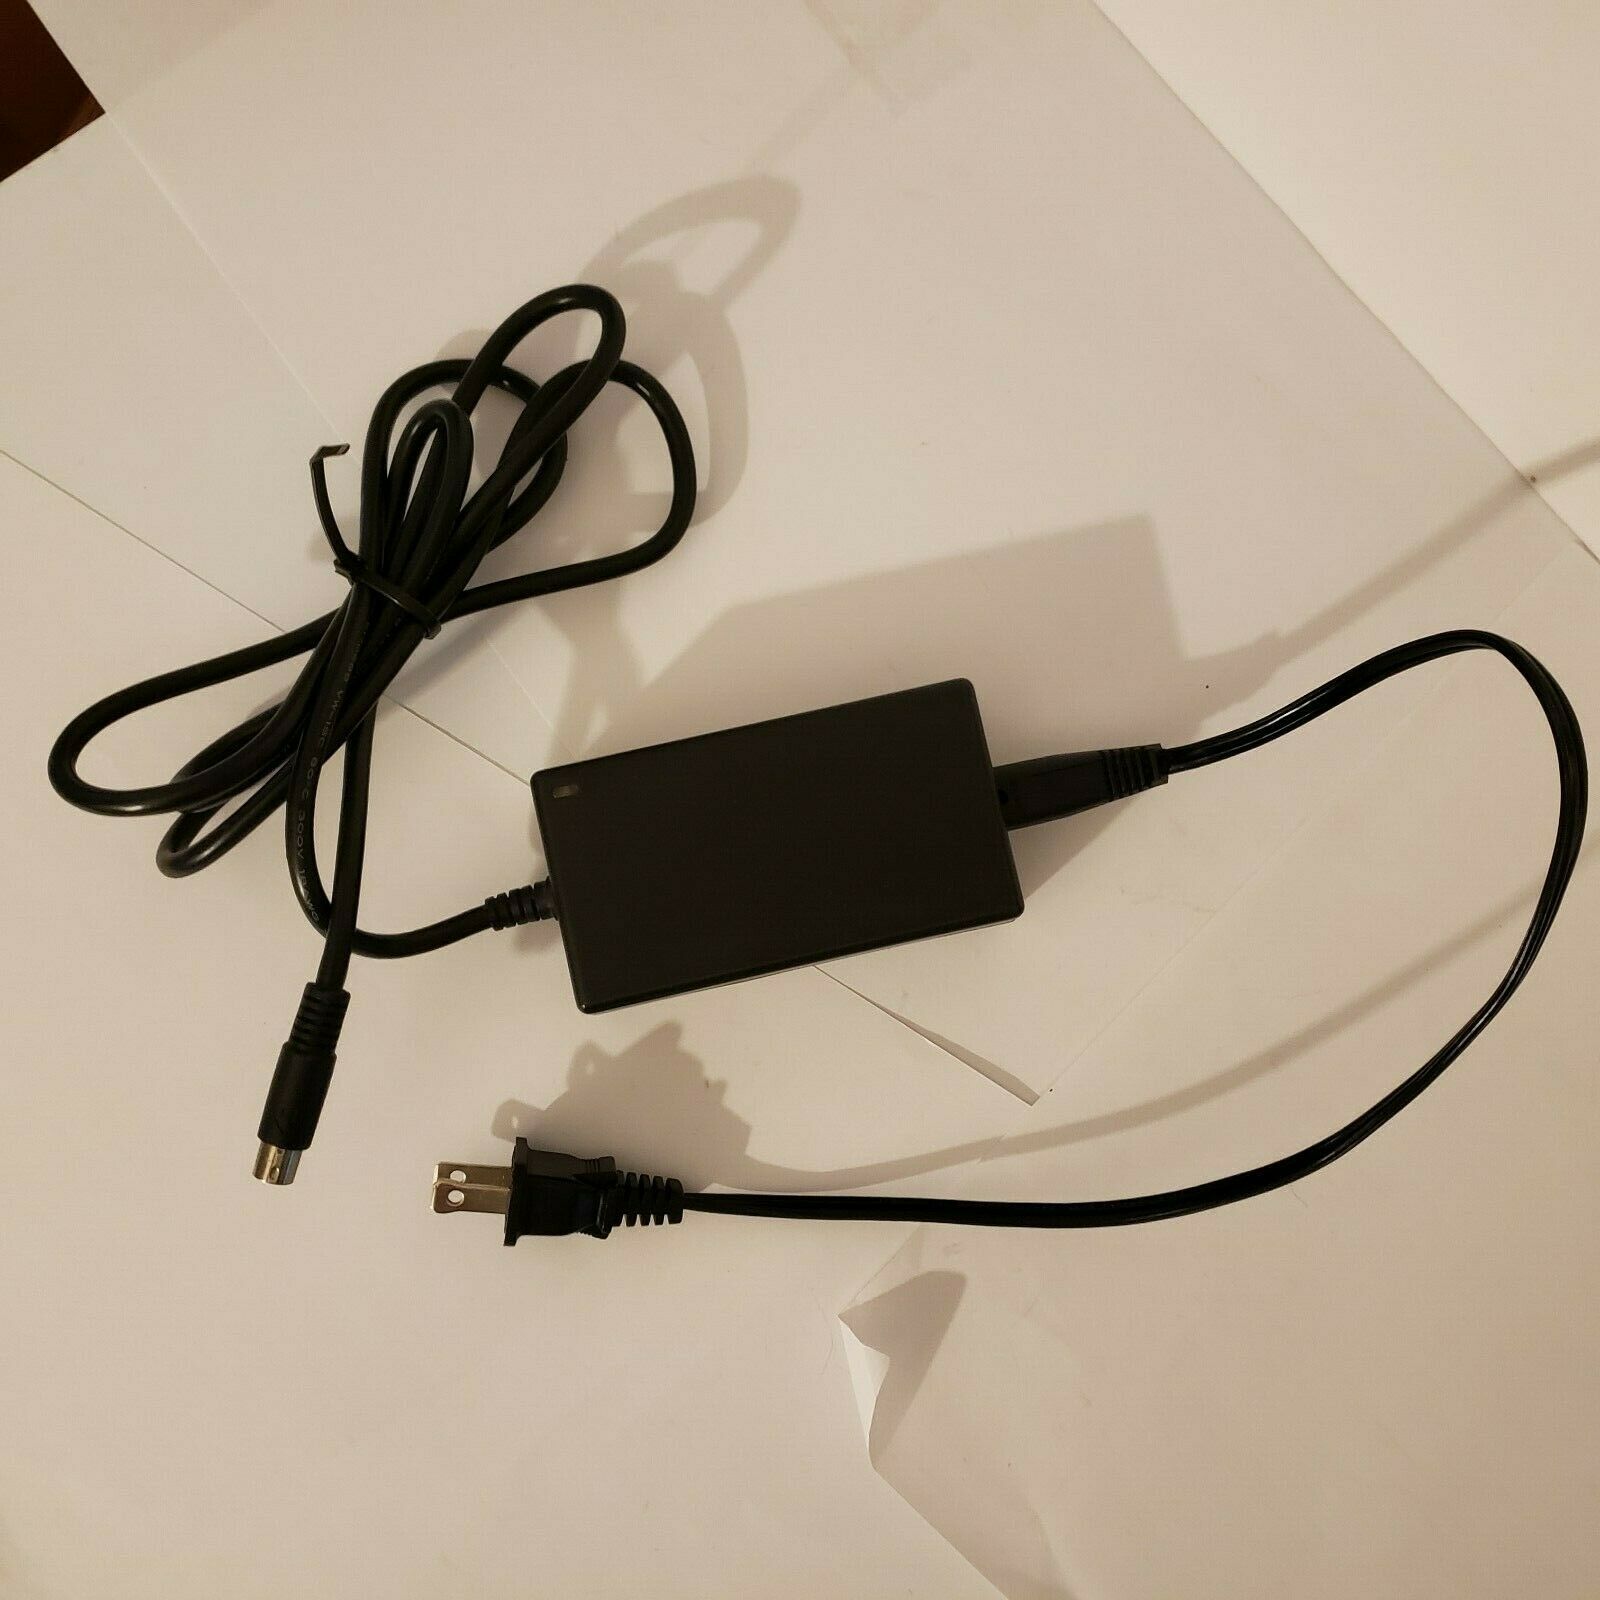 MicroSolutions SDD018-1000 MS Power Supply AC Adapter Output DC 5V/12V 1.2A/1.0A Connection Split/Duplication: 1:2 Ty